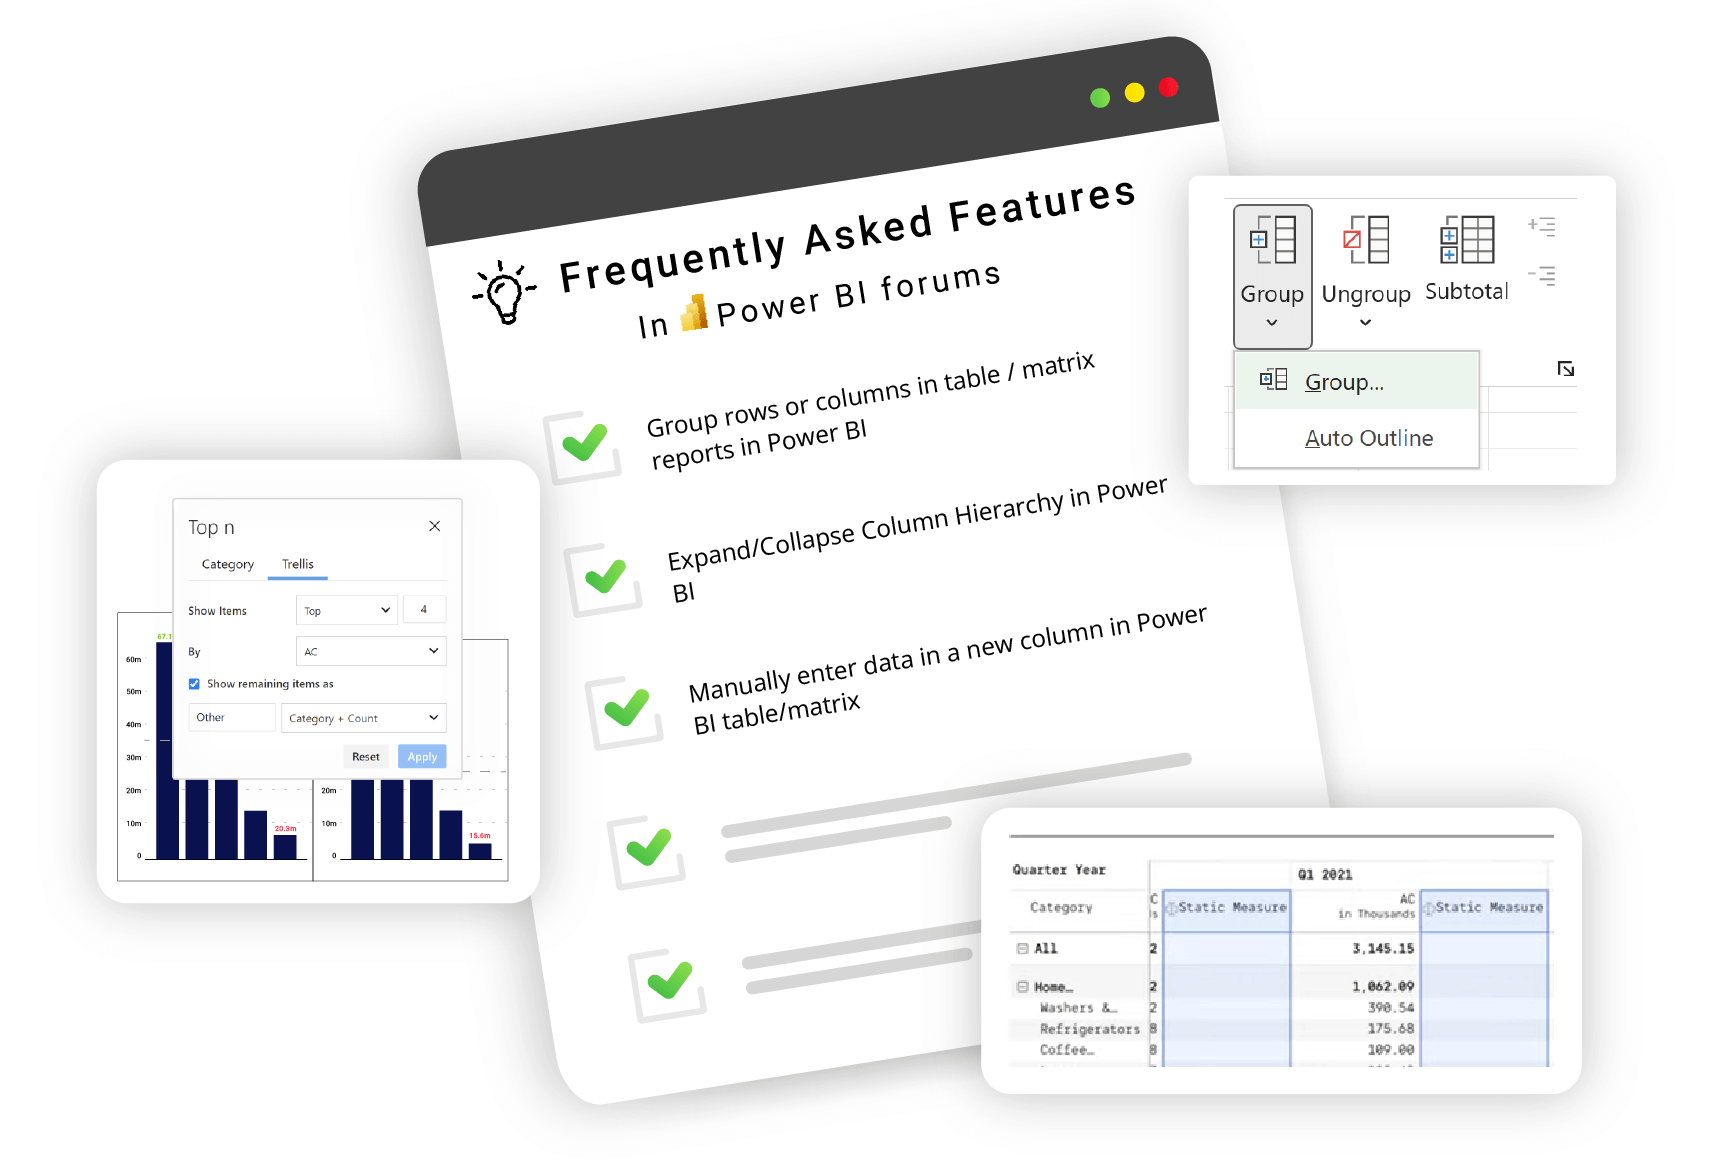 Highly-voted Features